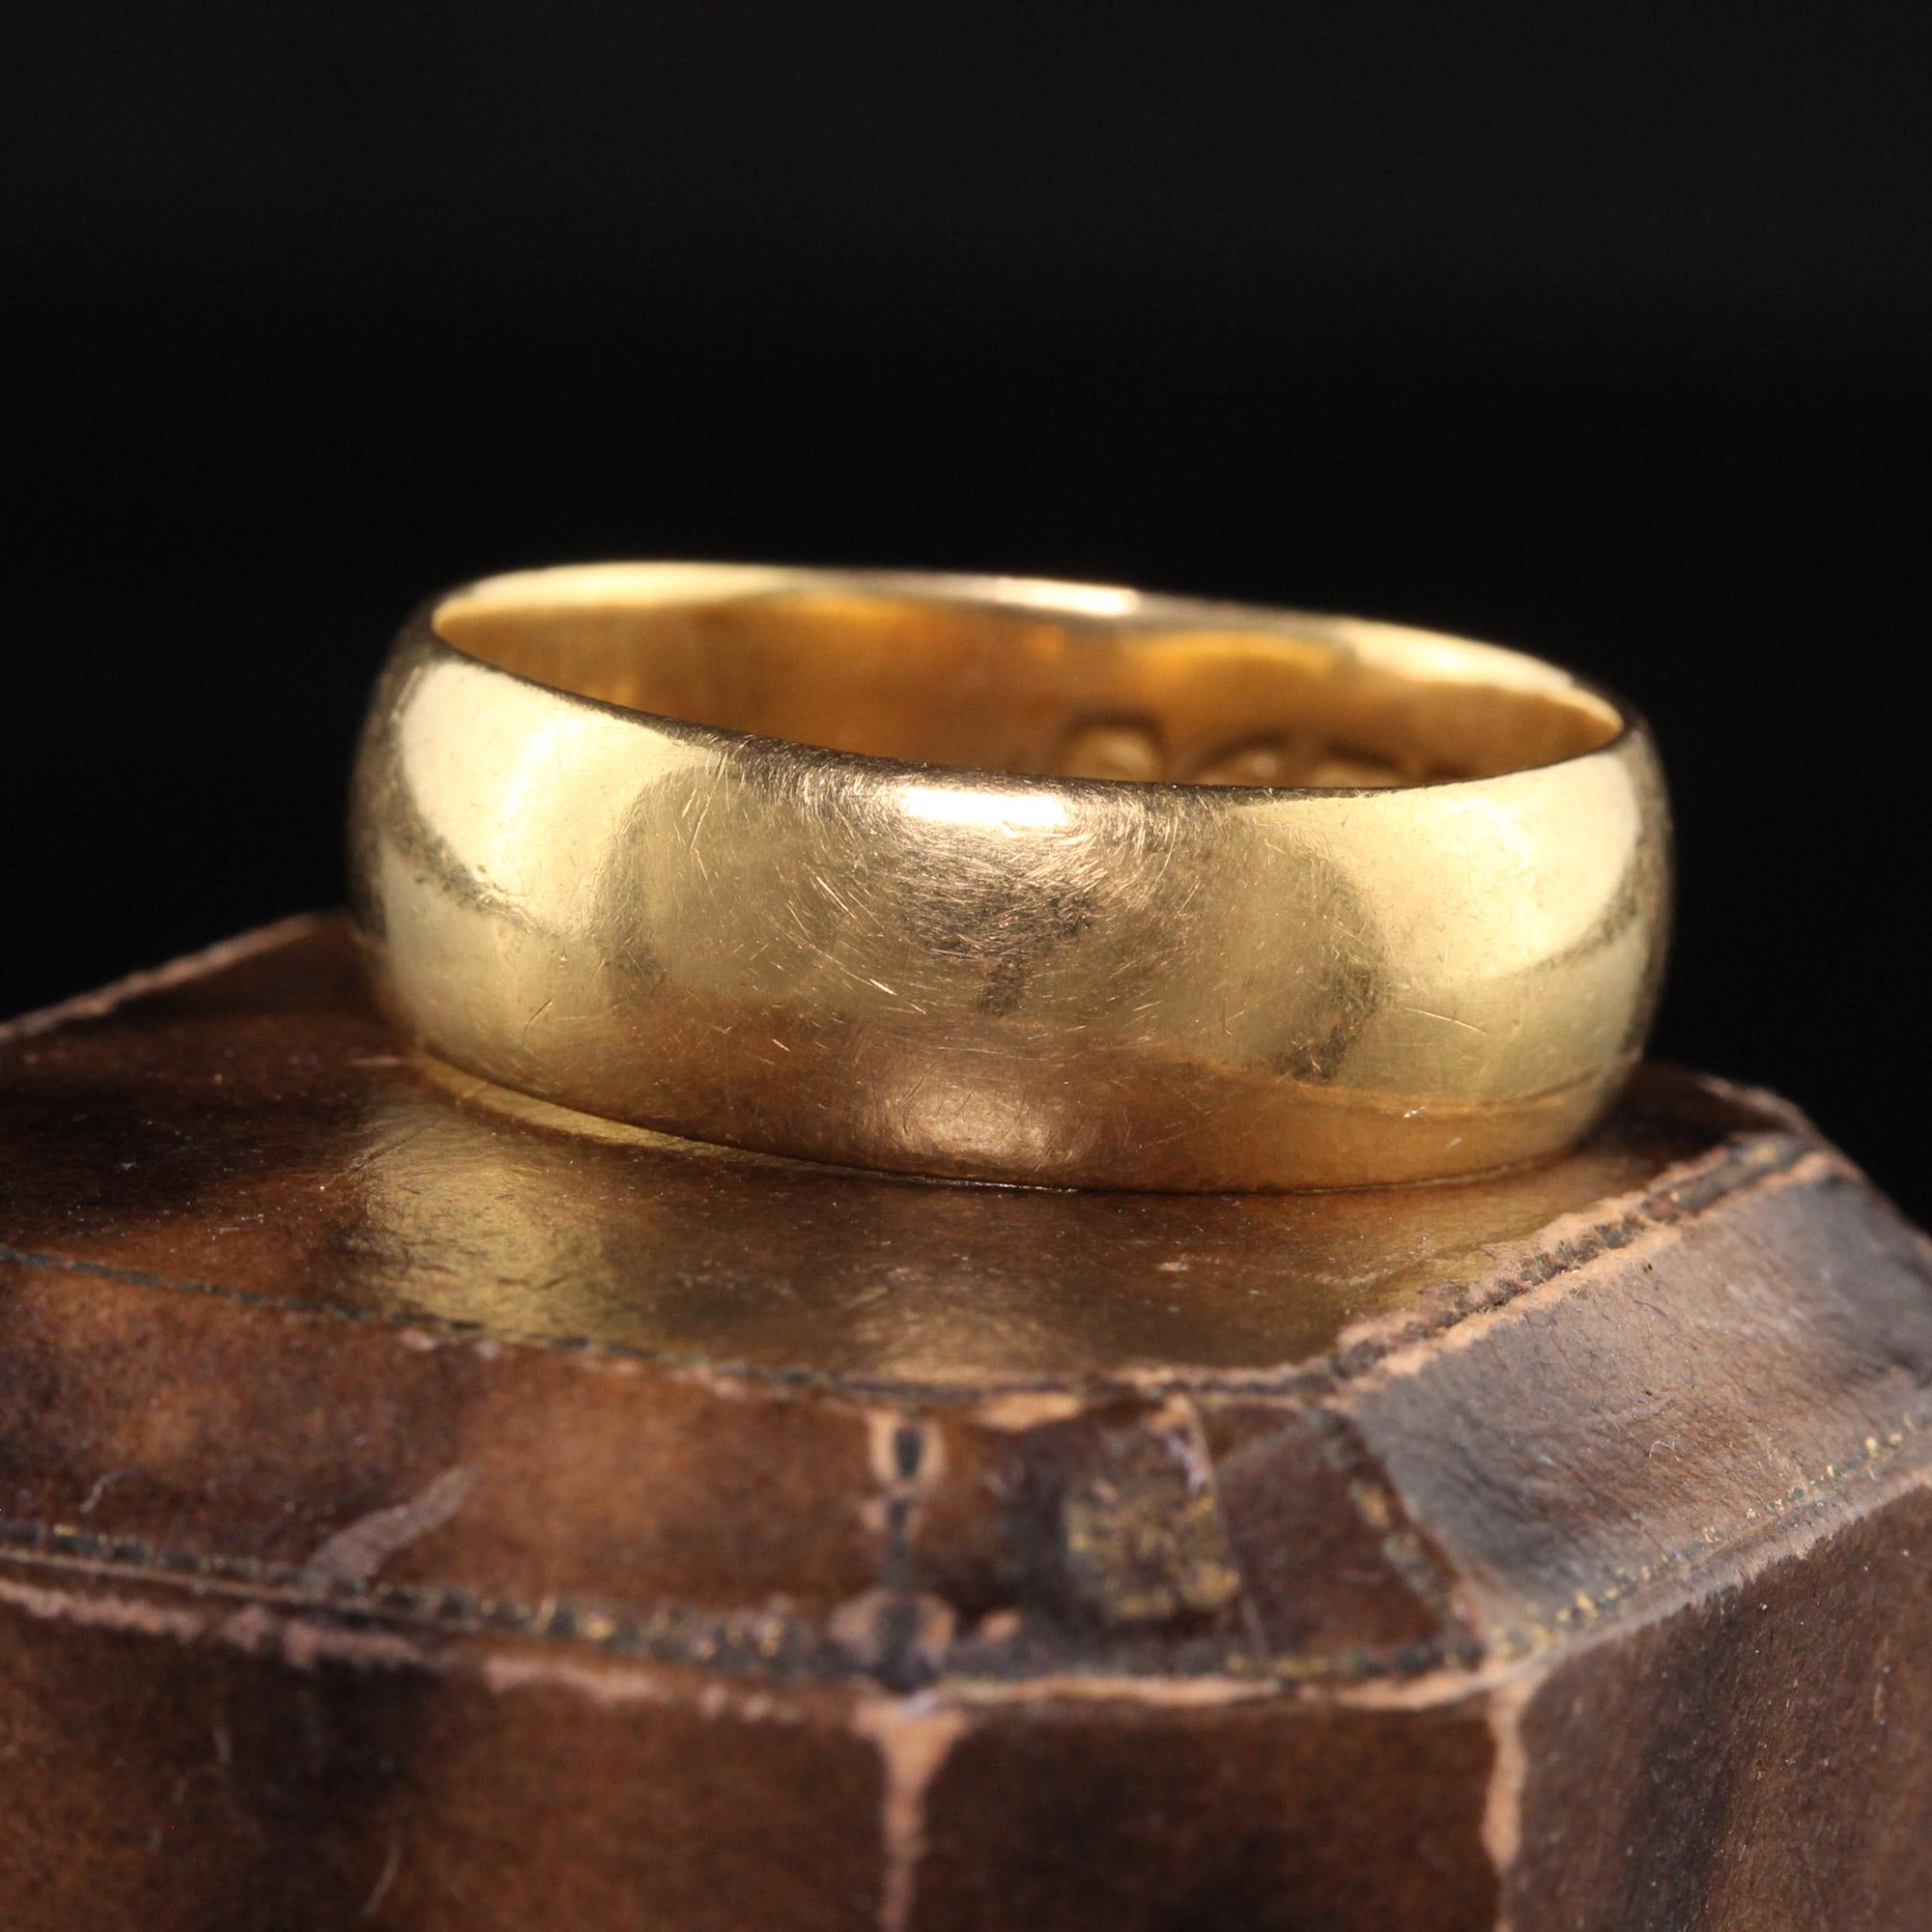 Beautiful Antique Victorian 18K Yellow Gold English Wide Wedding Band. This classic wedding band is crafted in 18k yellow gold. The band has english hallmarks inside the band and is in good condition.

Item #R1430

Metal: 18K Yellow Gold

Weight: